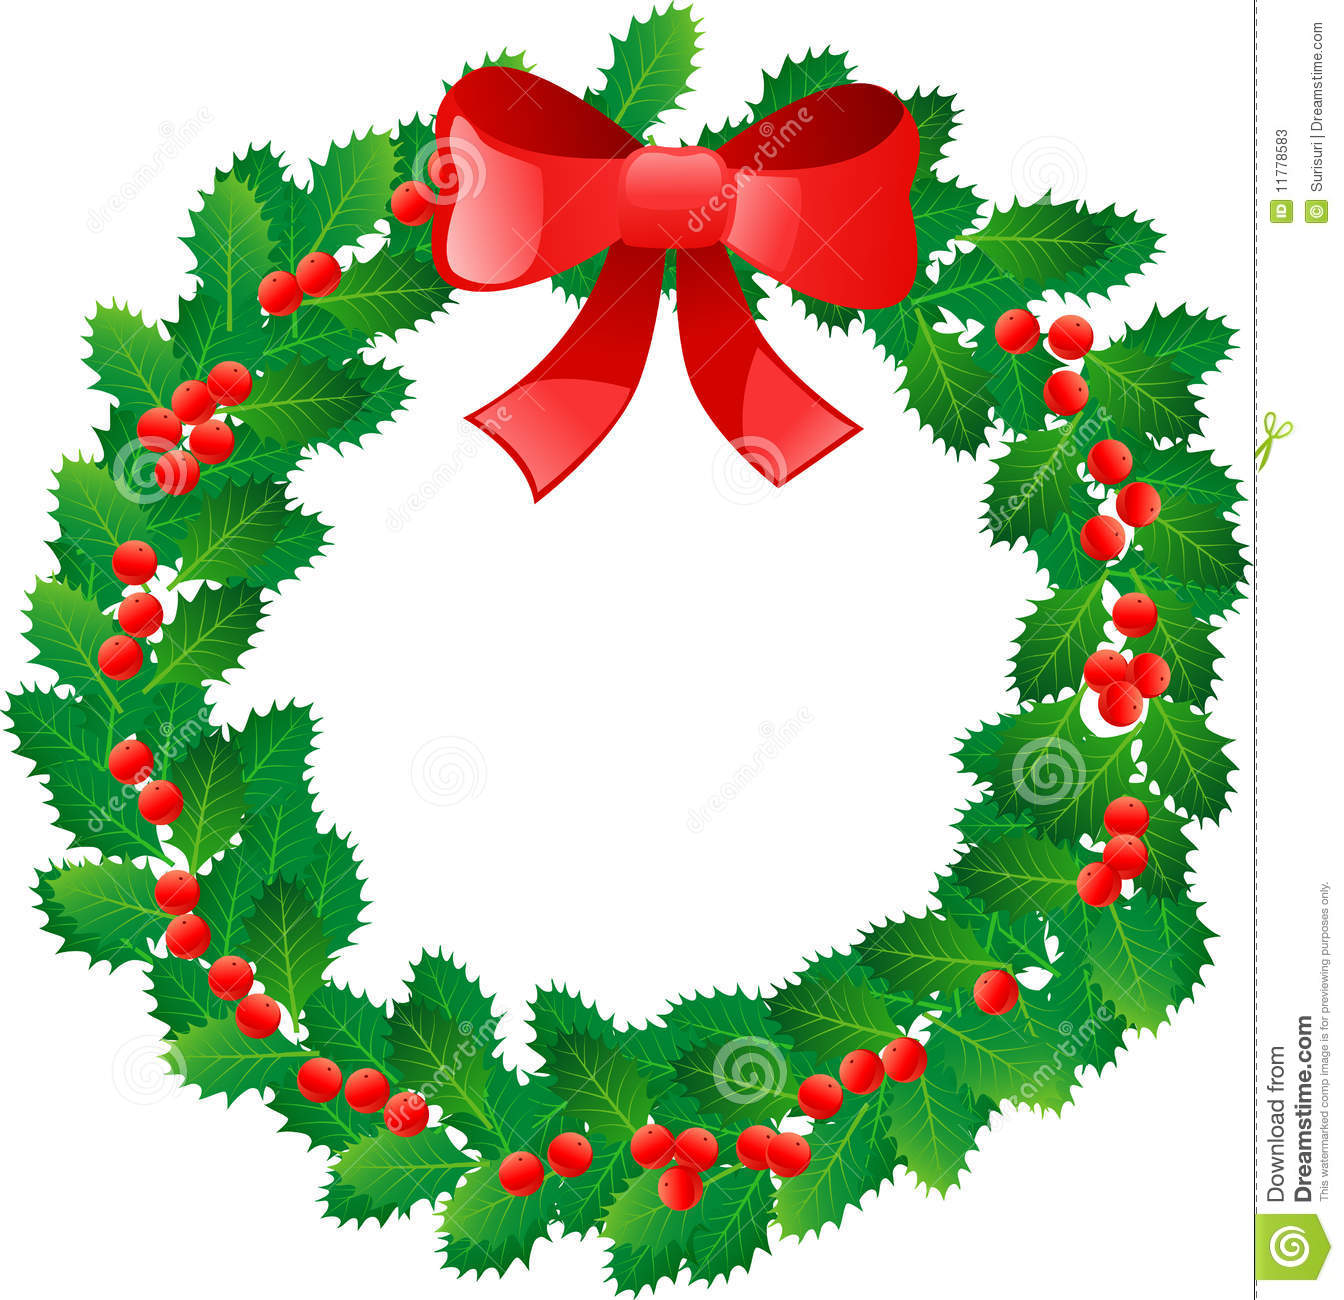 Clipart Christmas Garland   Clipart Panda   Free Clipart Images